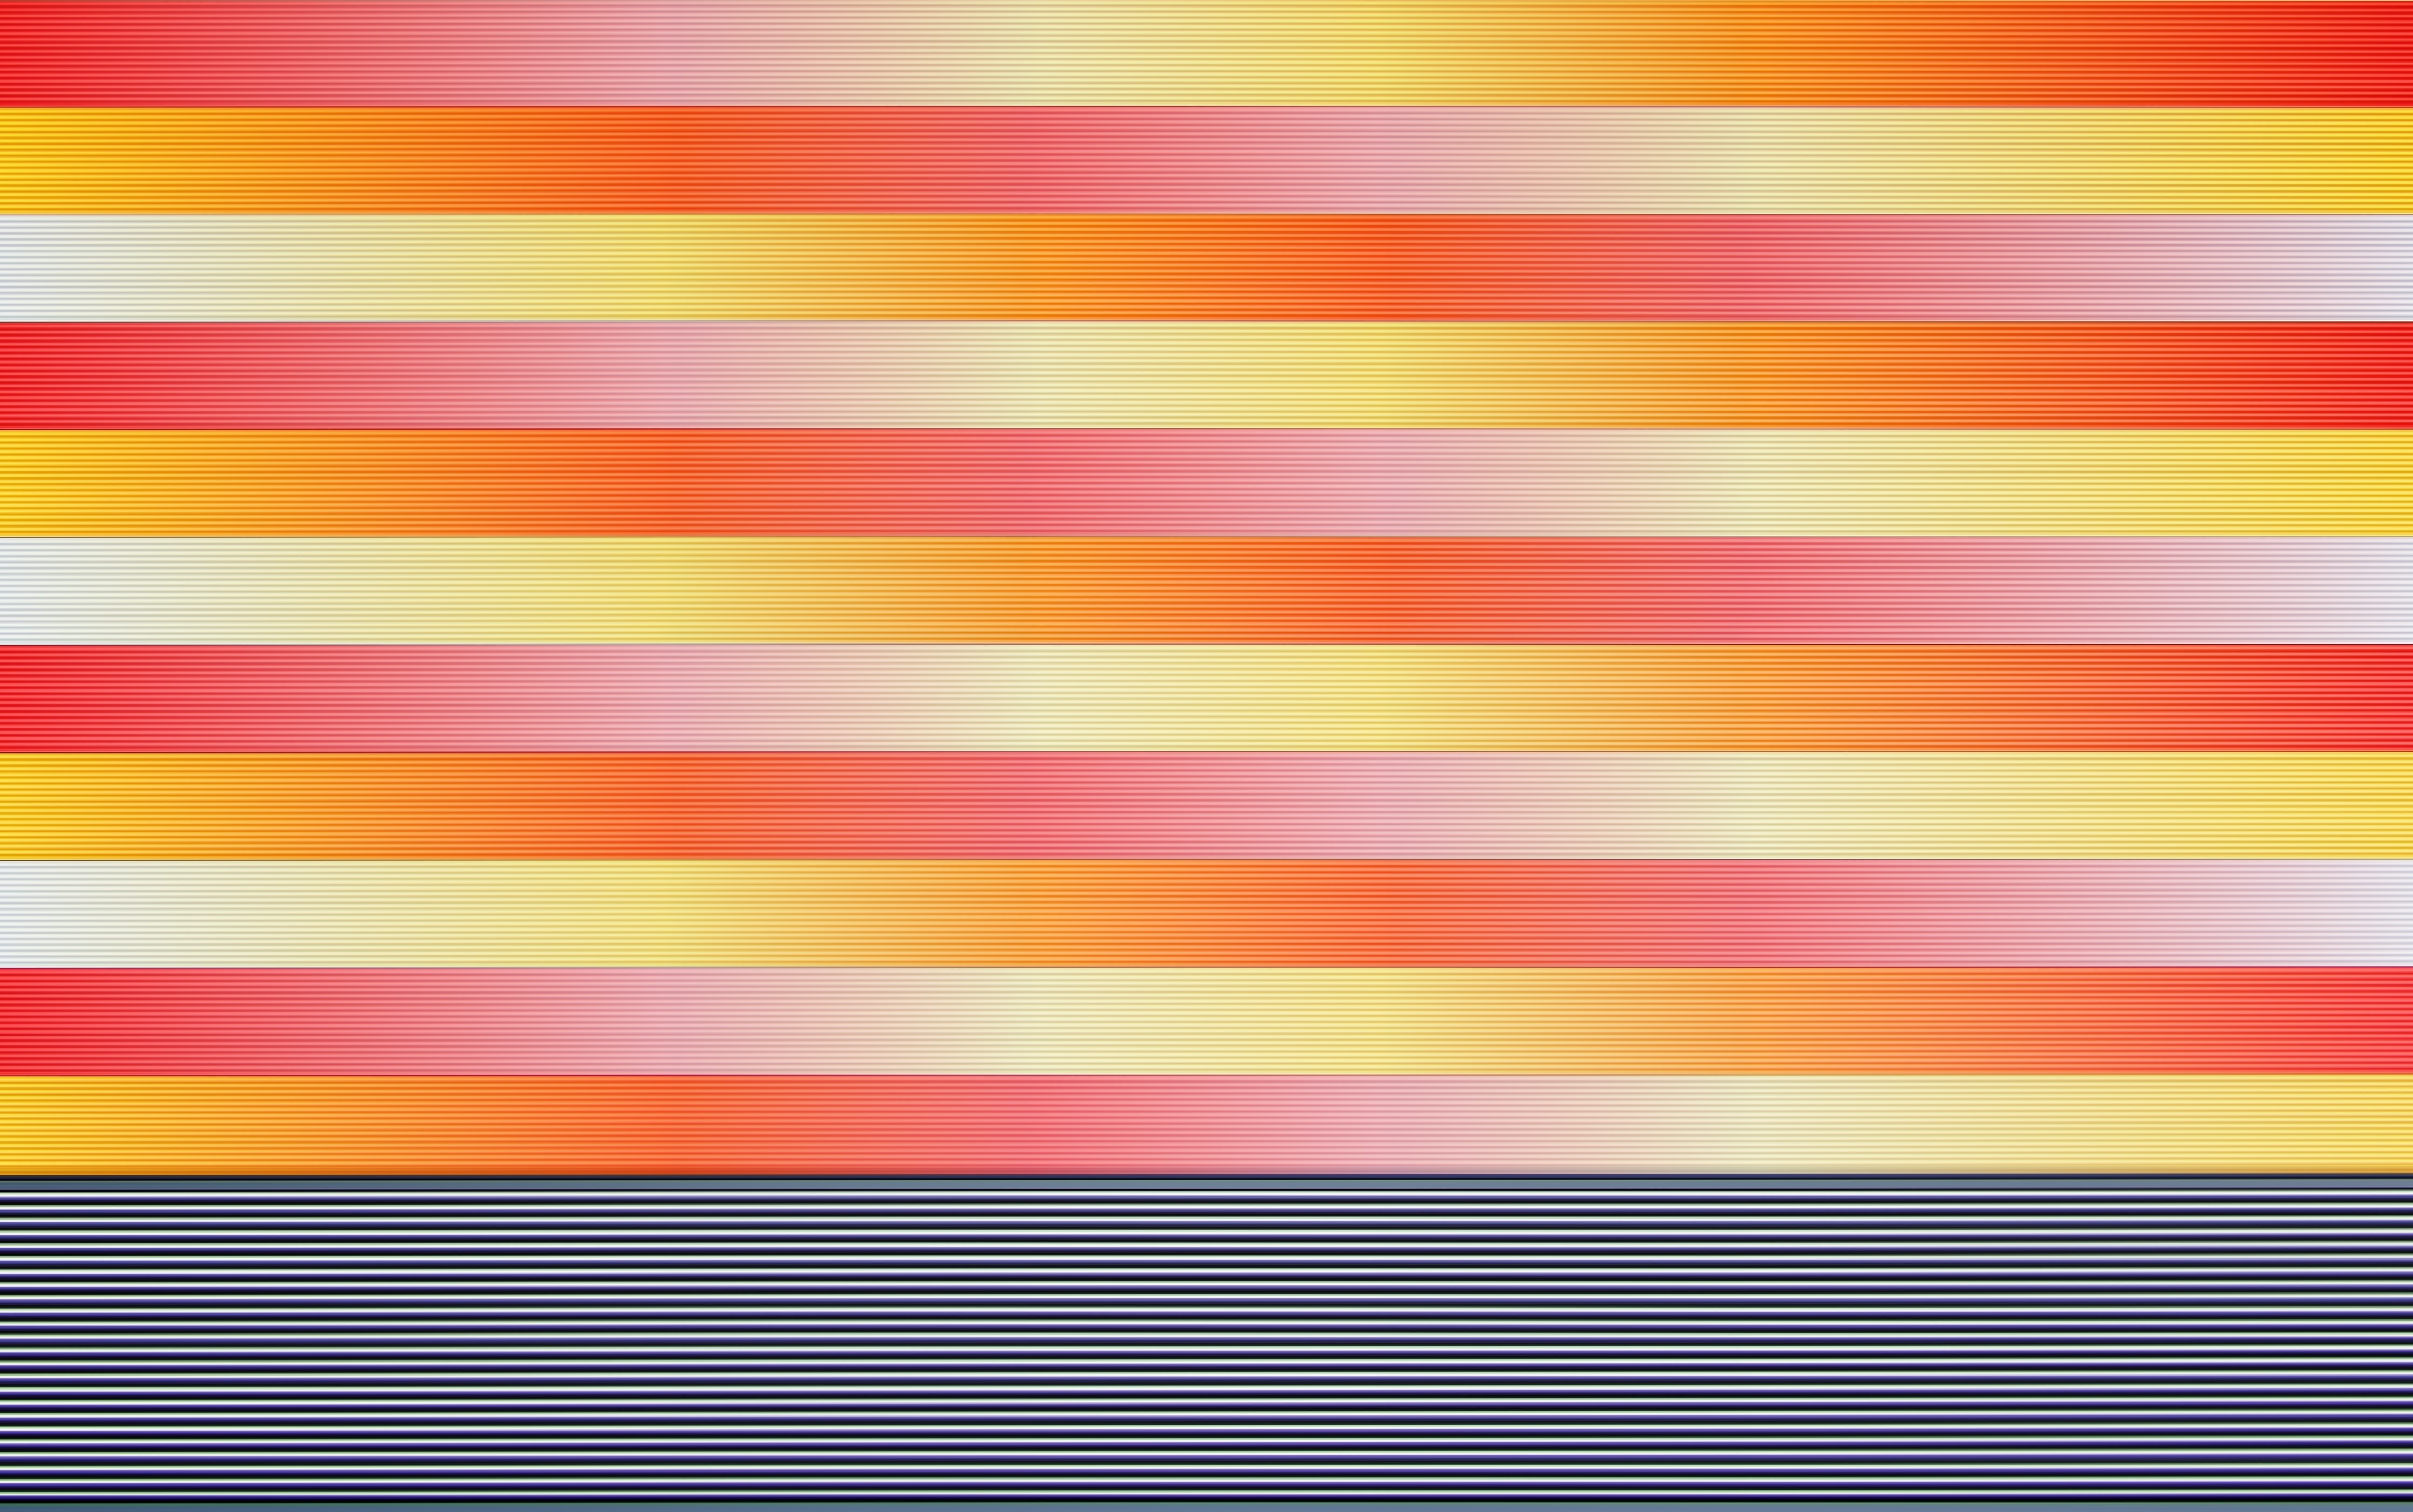 Windows Backgrounds streaks, abstract, lines, stripes, gradient